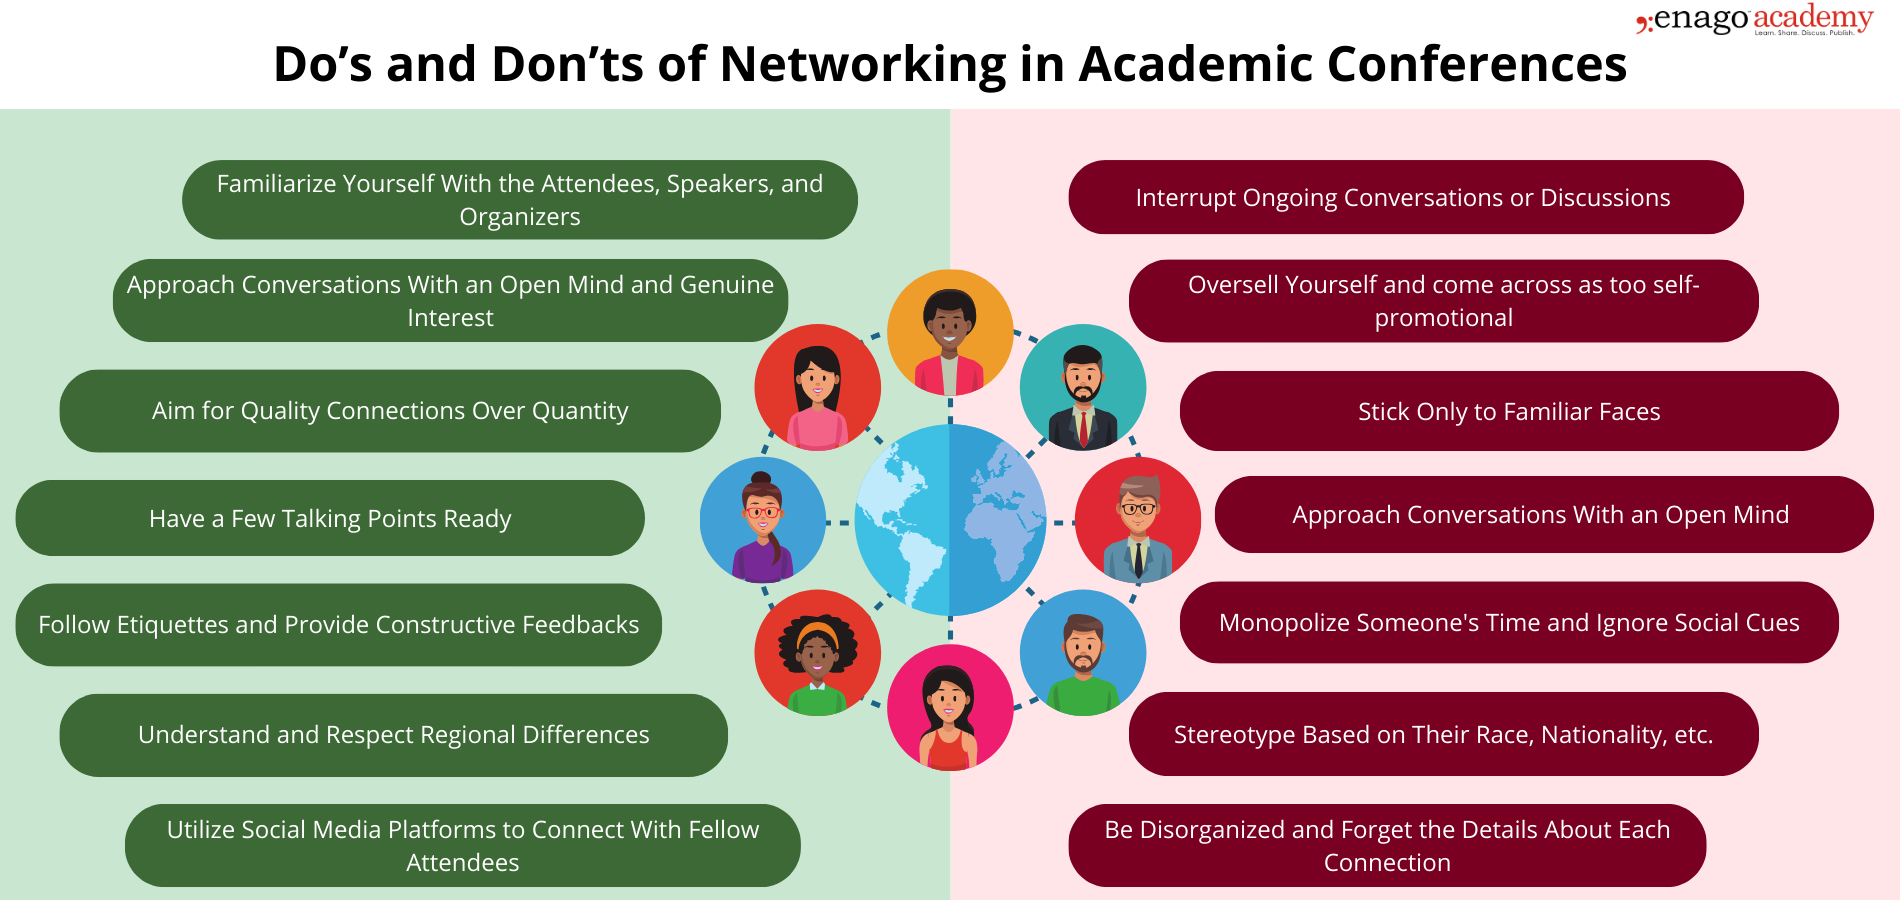 Do's and Don'ts of Networking